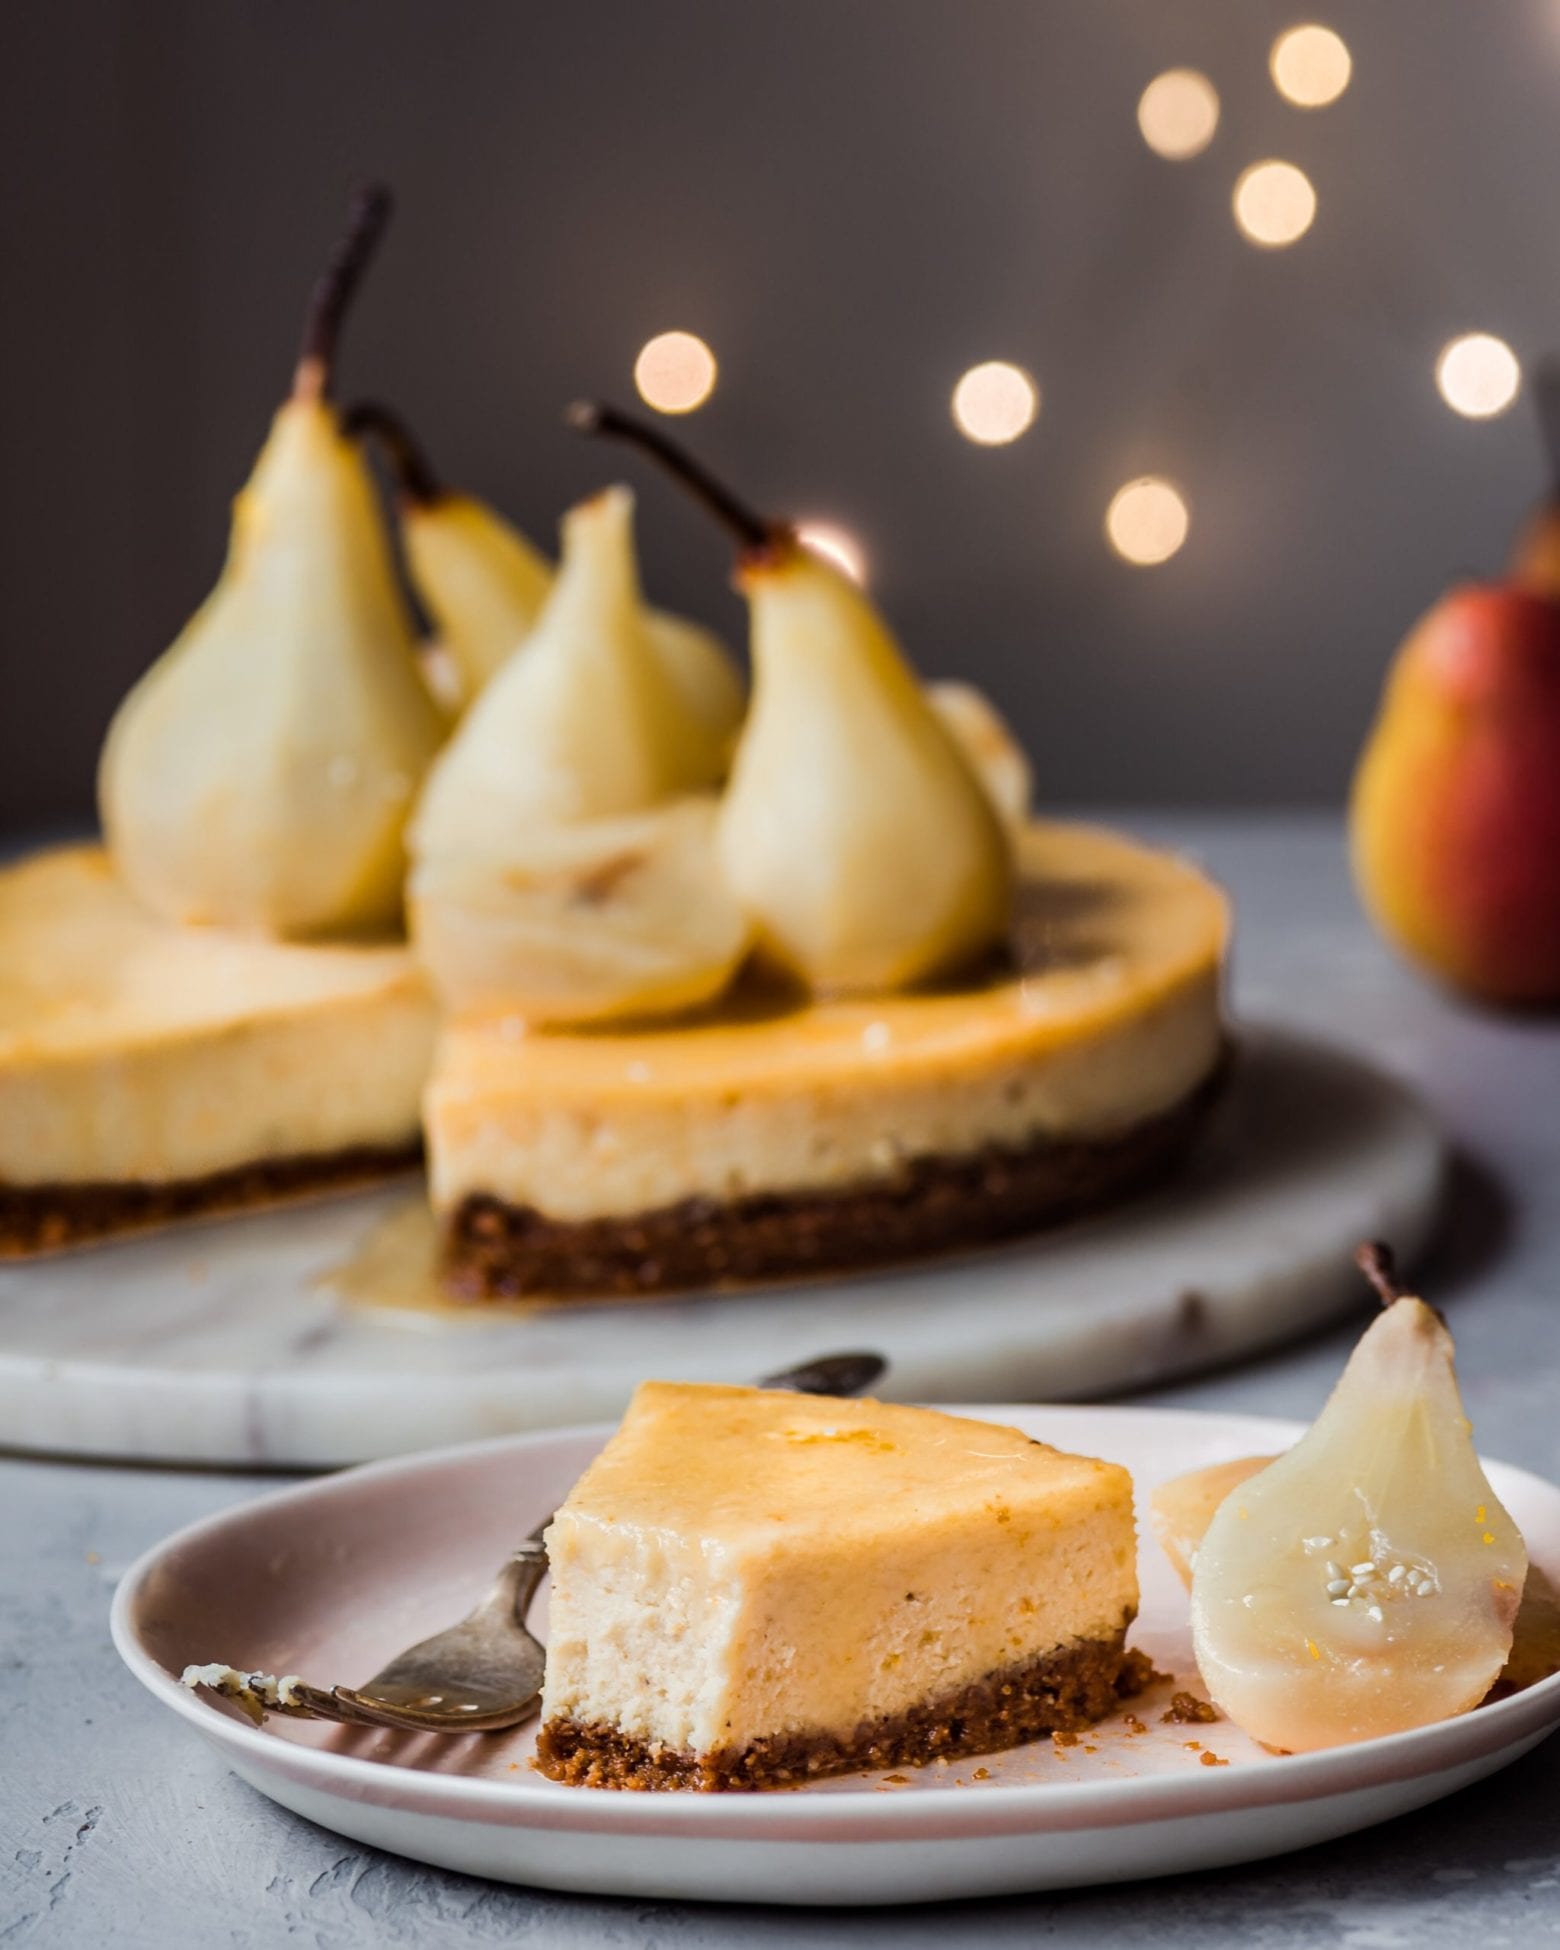 Ginger-Orange Vegan Cheesecake with Poached Pears